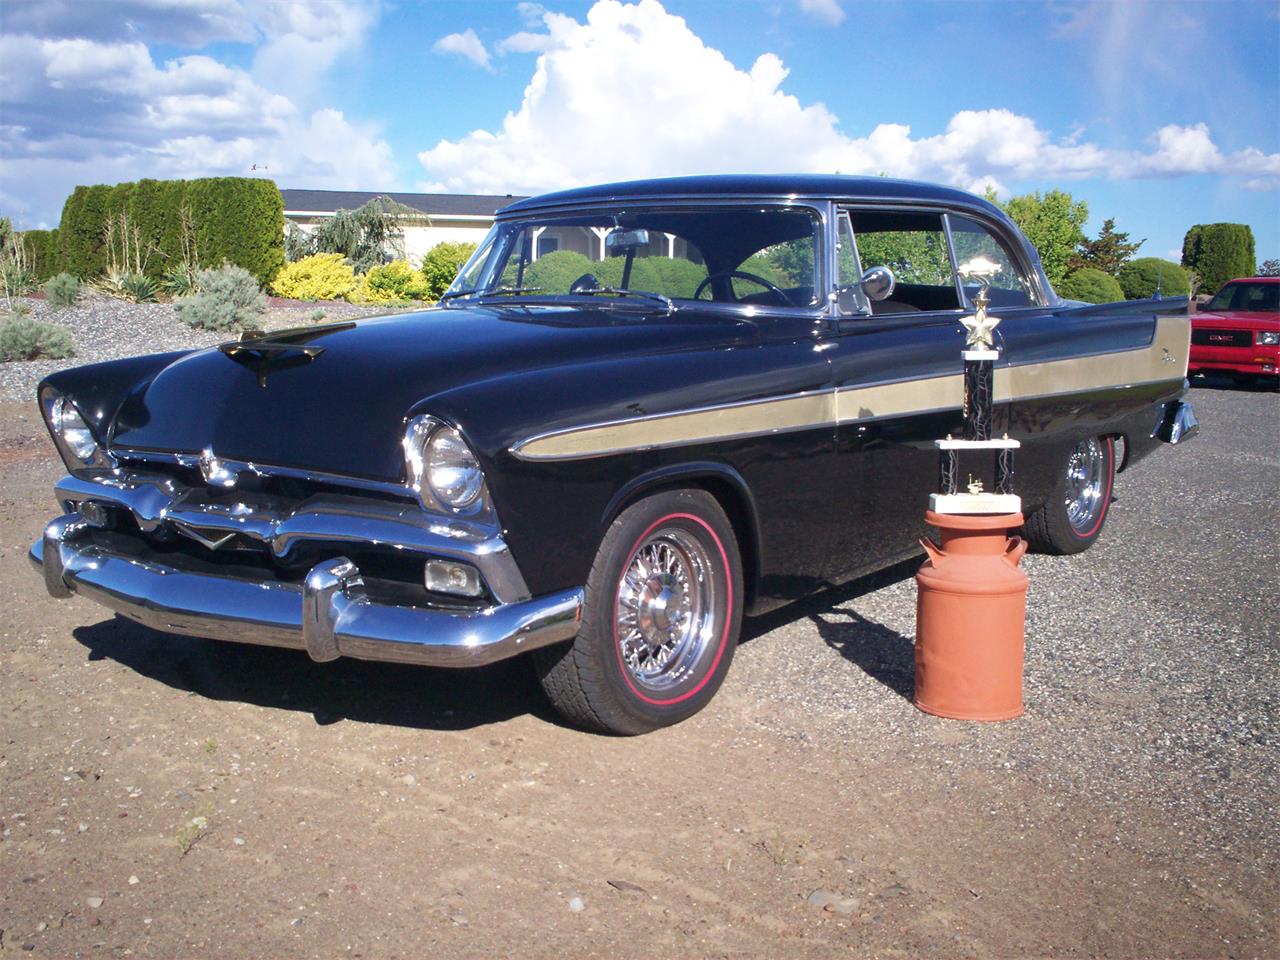 1956 Plymouth Fury in Desert Aire, Washington